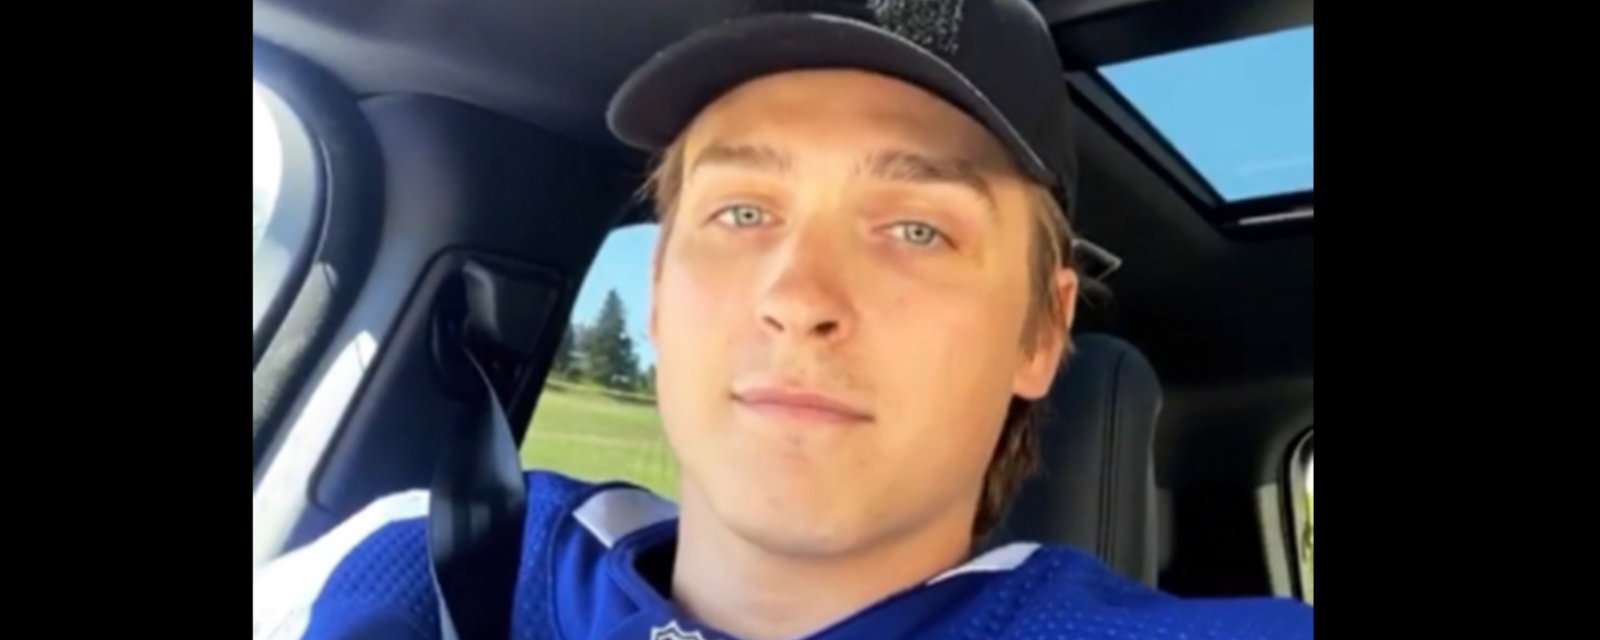 Canucks’ Virtanen breaks the law on Instagram, quickly deletes video